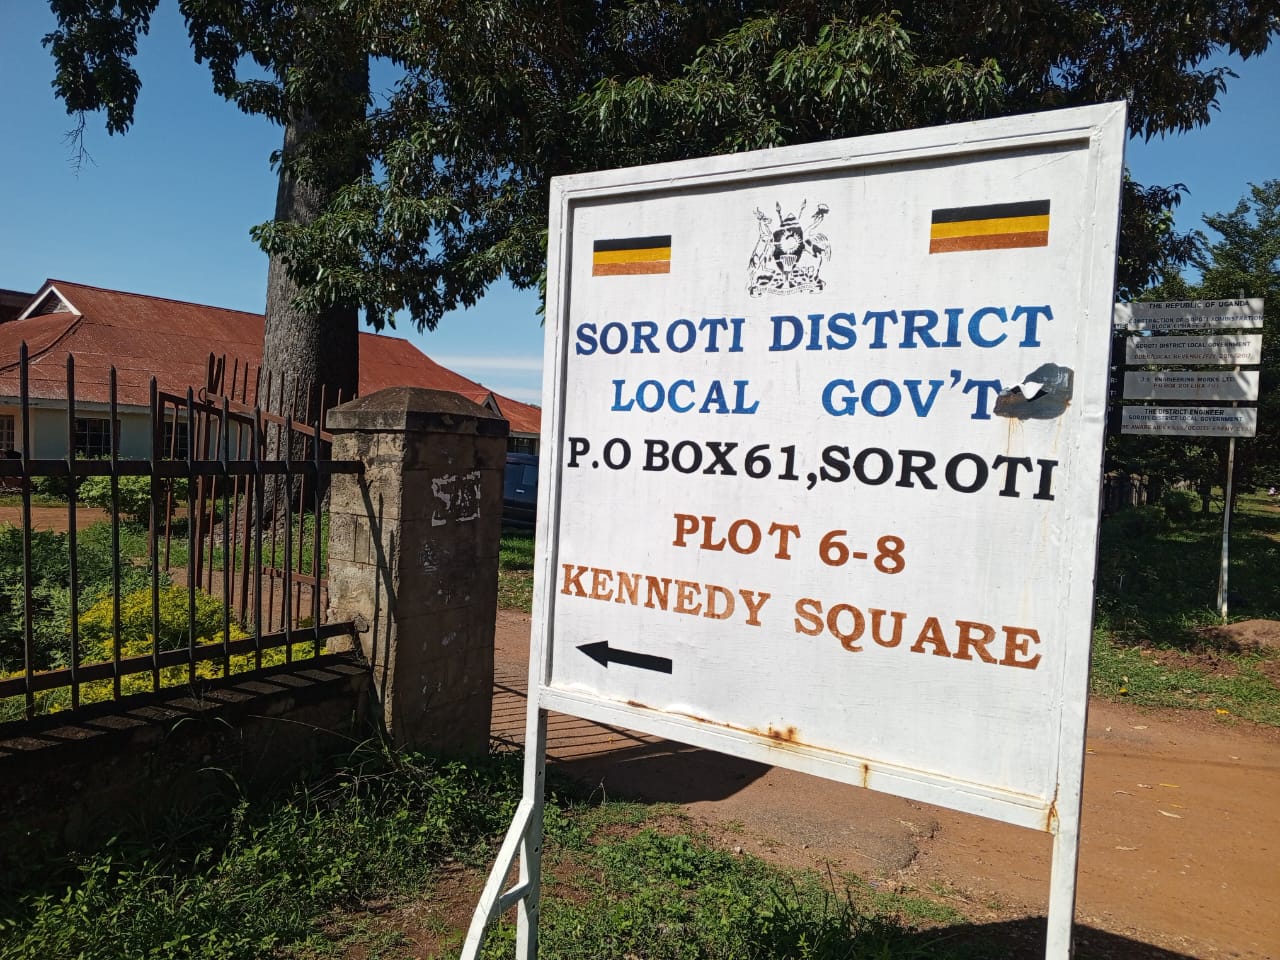 Minister Magyezi rejects calls to remove Soroti LC5 chairman from office